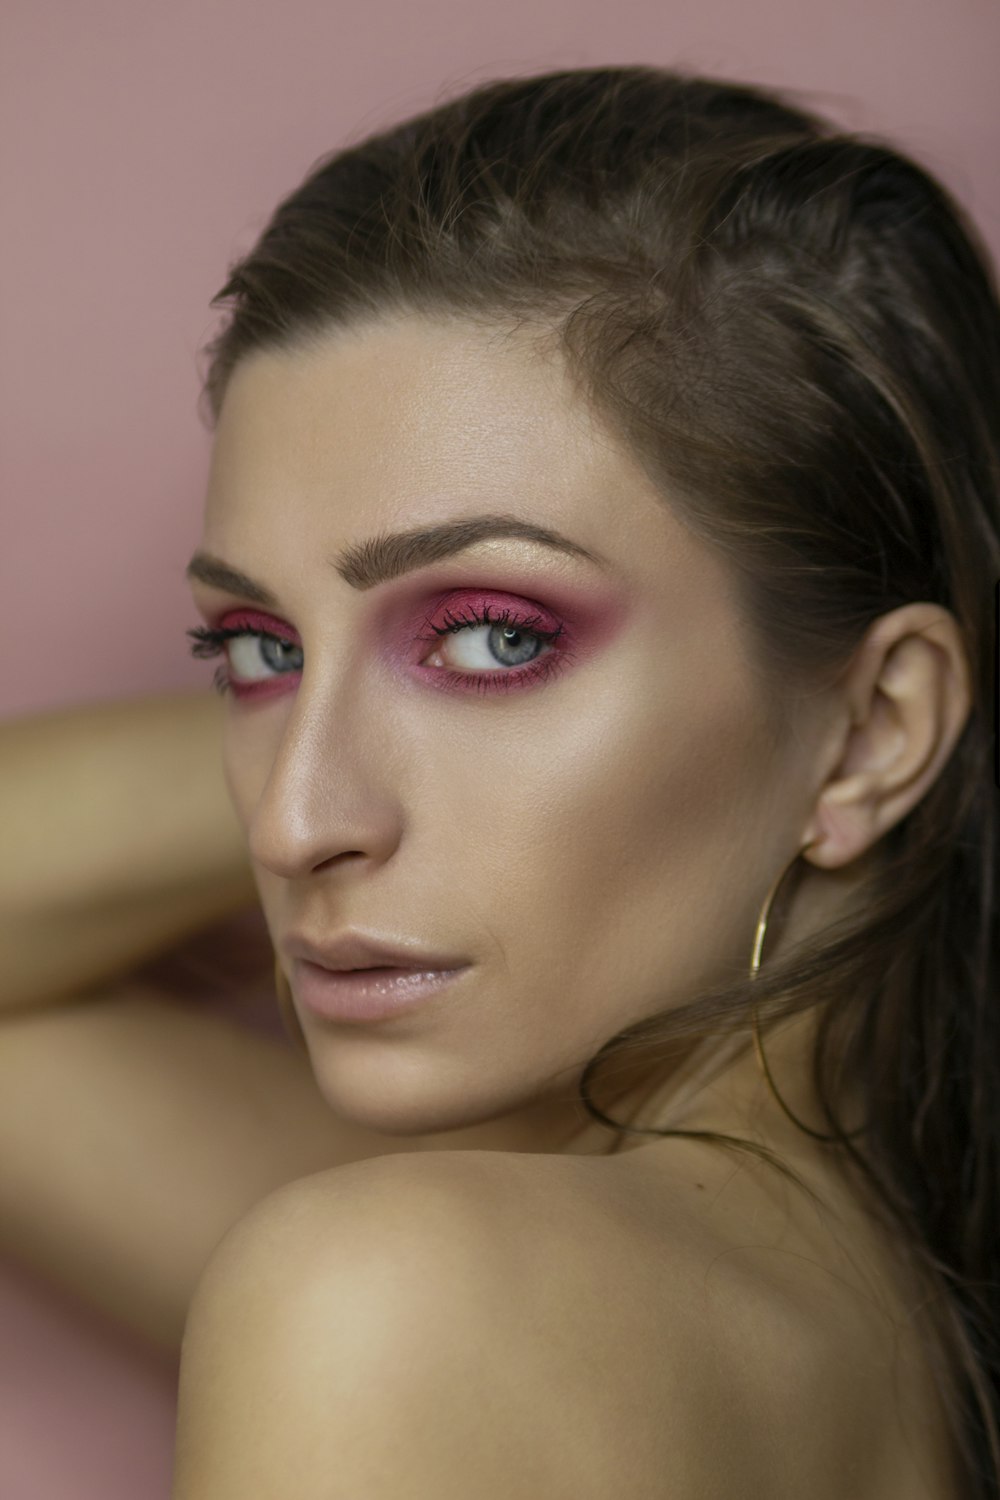 woman with pink lipstick and black mascara